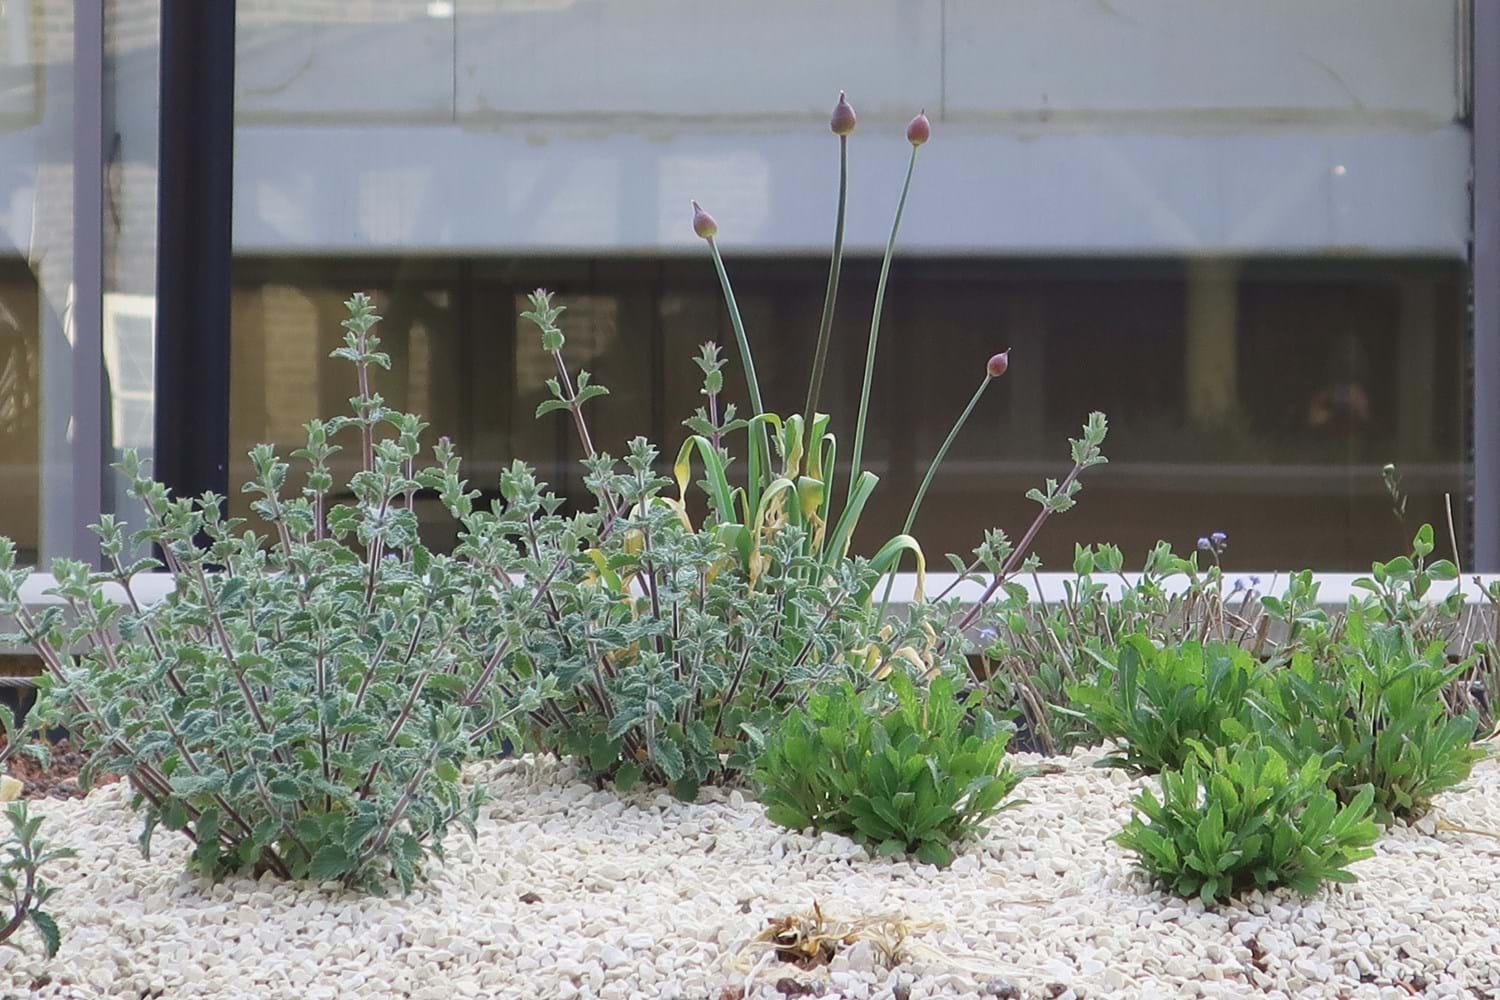 Chive plants and catnip in a roof garden setting surrounded by cream gravel